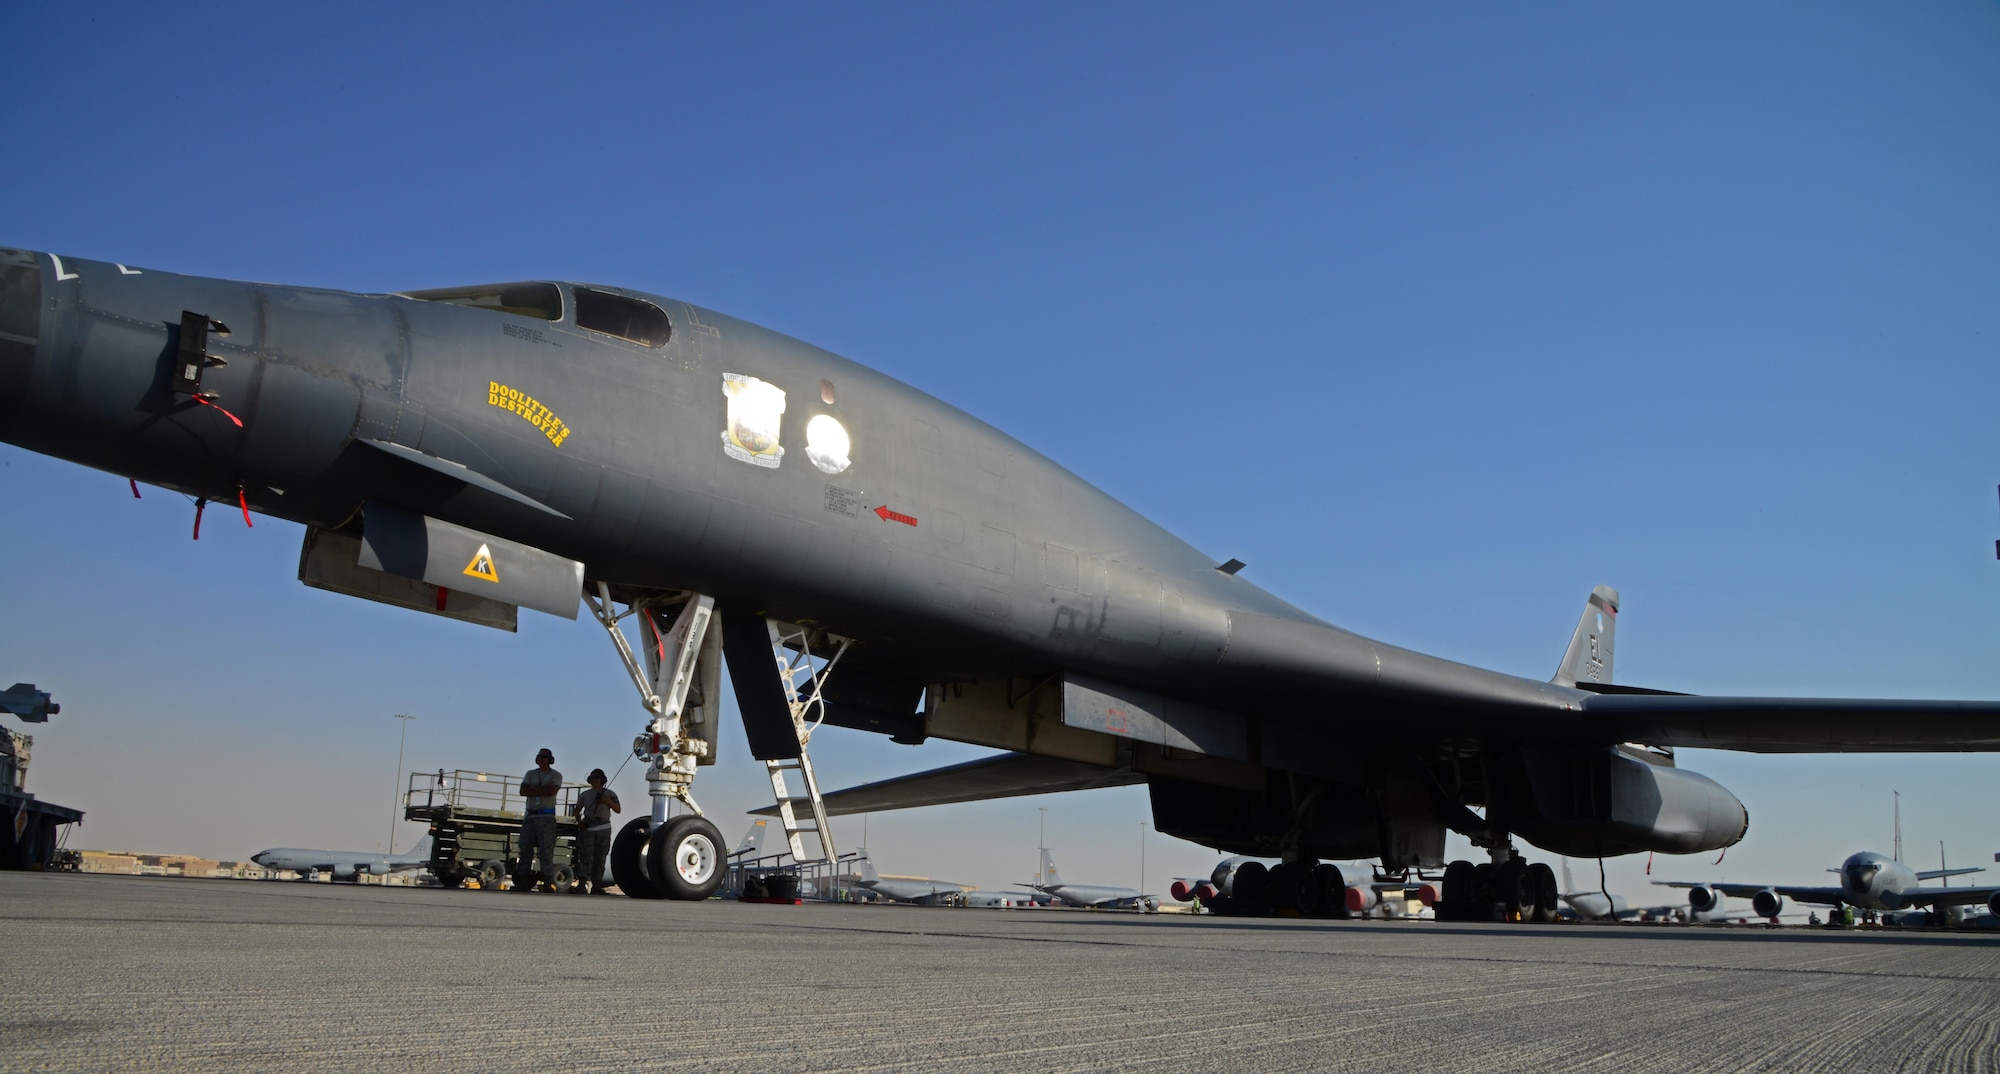 Airmen from the 379th Expeditionary Maintenance Squadron perform pre-flight checks on a B-1B Lancer, Feb. 25, 2015, at Al Udeid Air Base, Qatar, in preparation of support for Operations Inherent Resolve and Freedom’s Sentinel. The B-1 carries the largest payload of both guided and unguided weapons in the Air Force inventory and is a key resource for strike operations throughout the U.S. Air Forces Central Command area of responsibility. (U.S. Air Force photo/Senior Airman Kia Atkins)